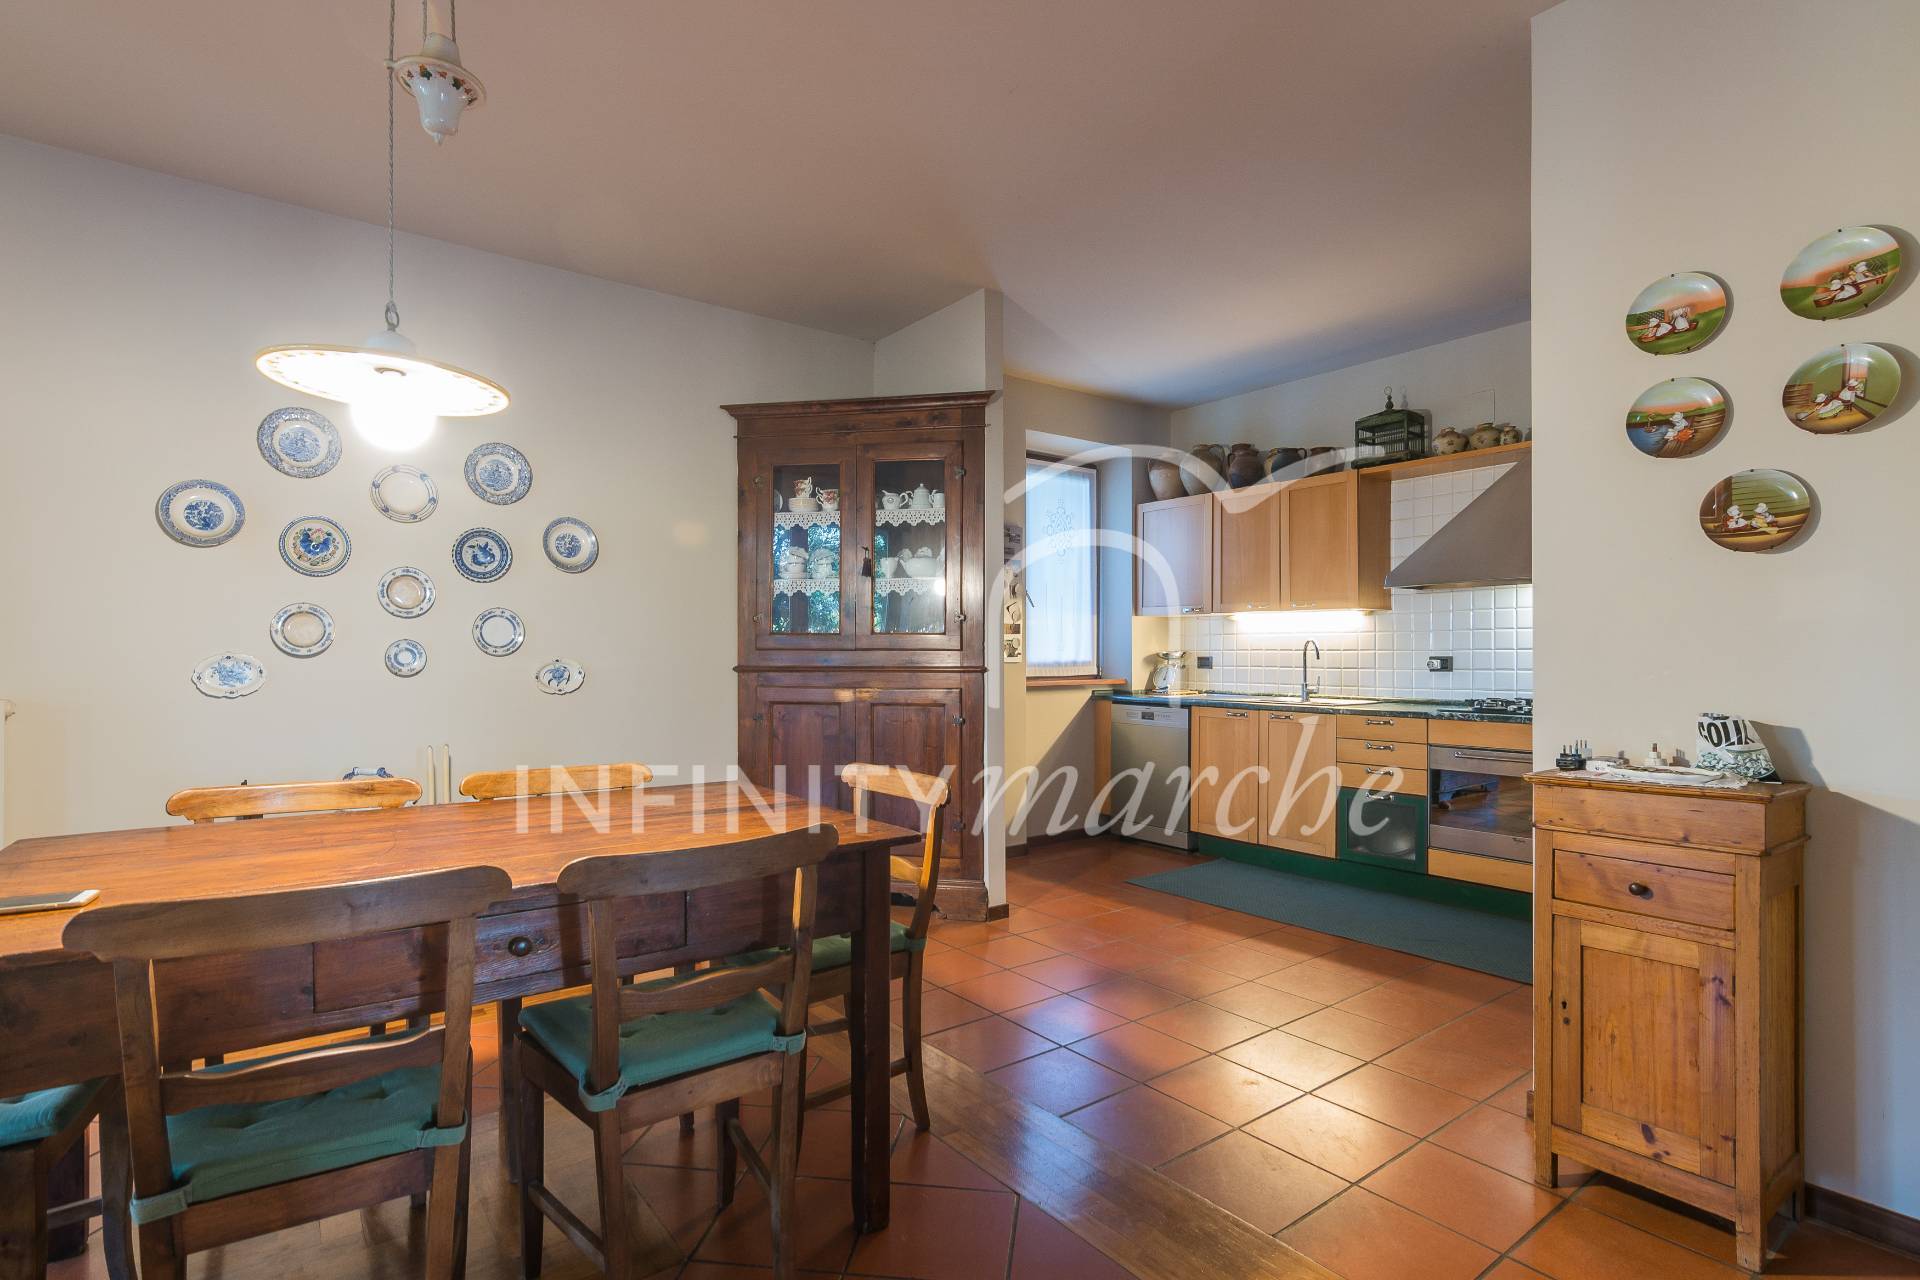 House in Morrovalle (Macerata)